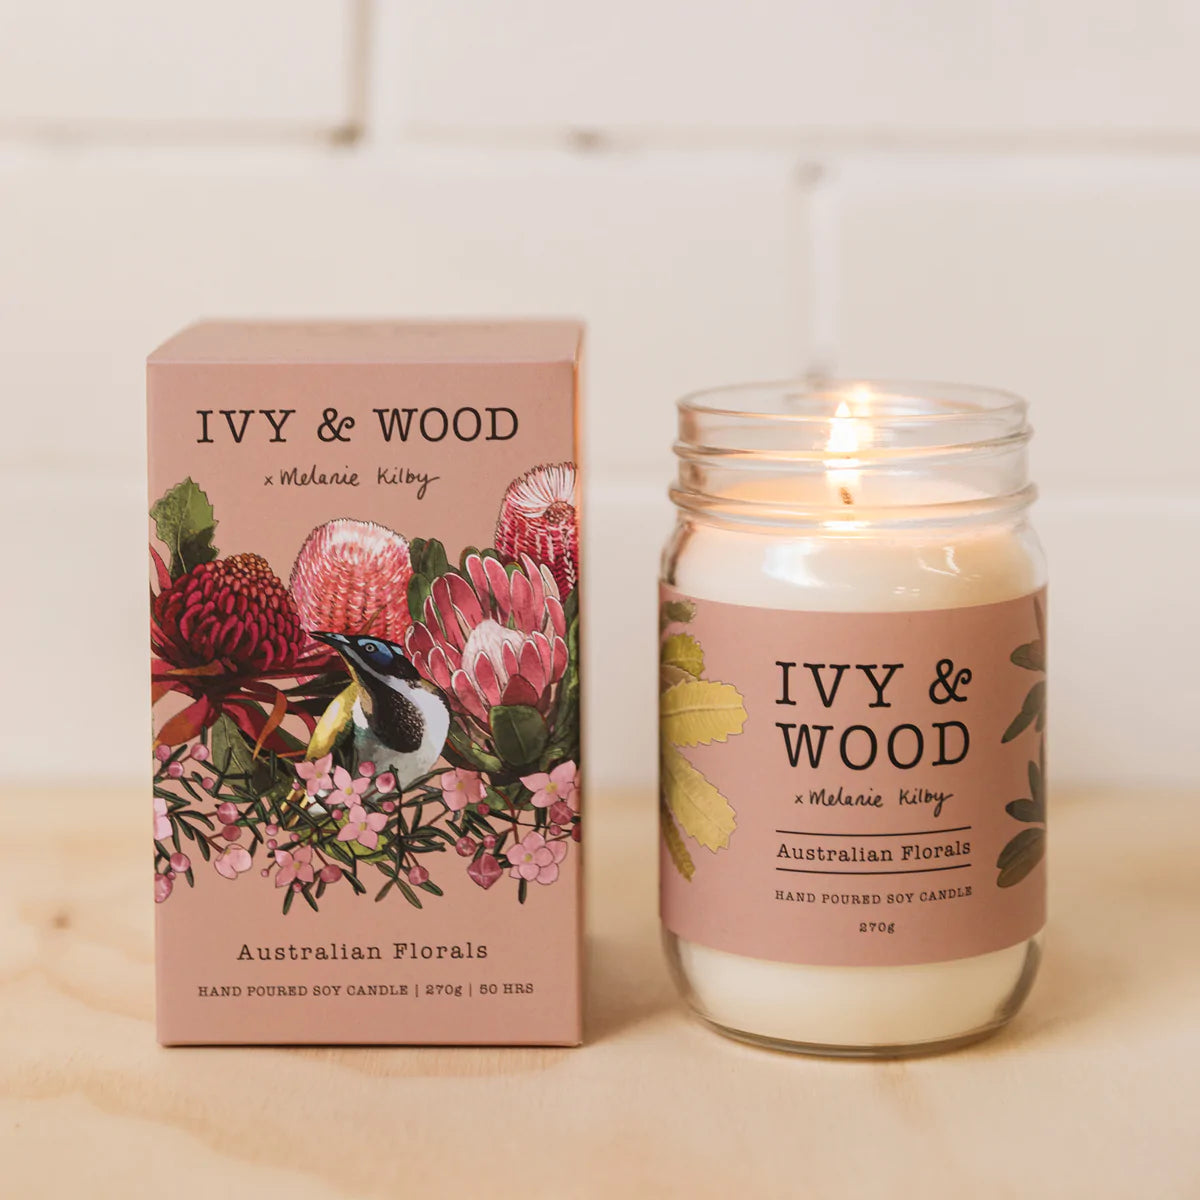 IVY & WOOD - Australian Florals Scented Candle 'Australiana' Collection